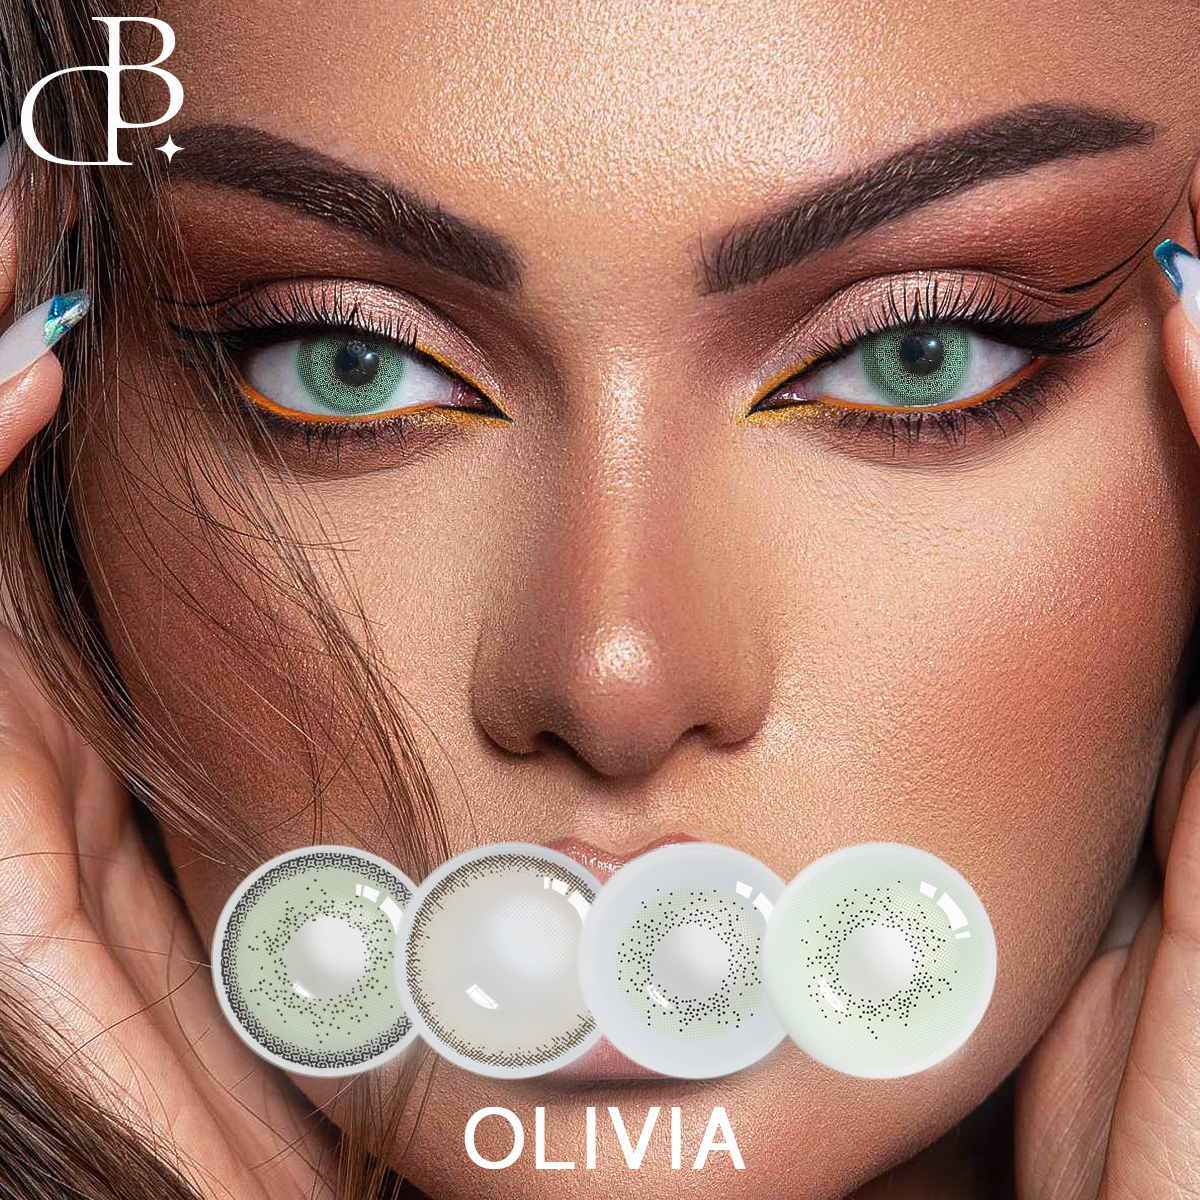 OLIVIA Hot sale Colored Eye Contact Lens oem Contacto de color 14.20mm 14.50mm Color Contact Lenses